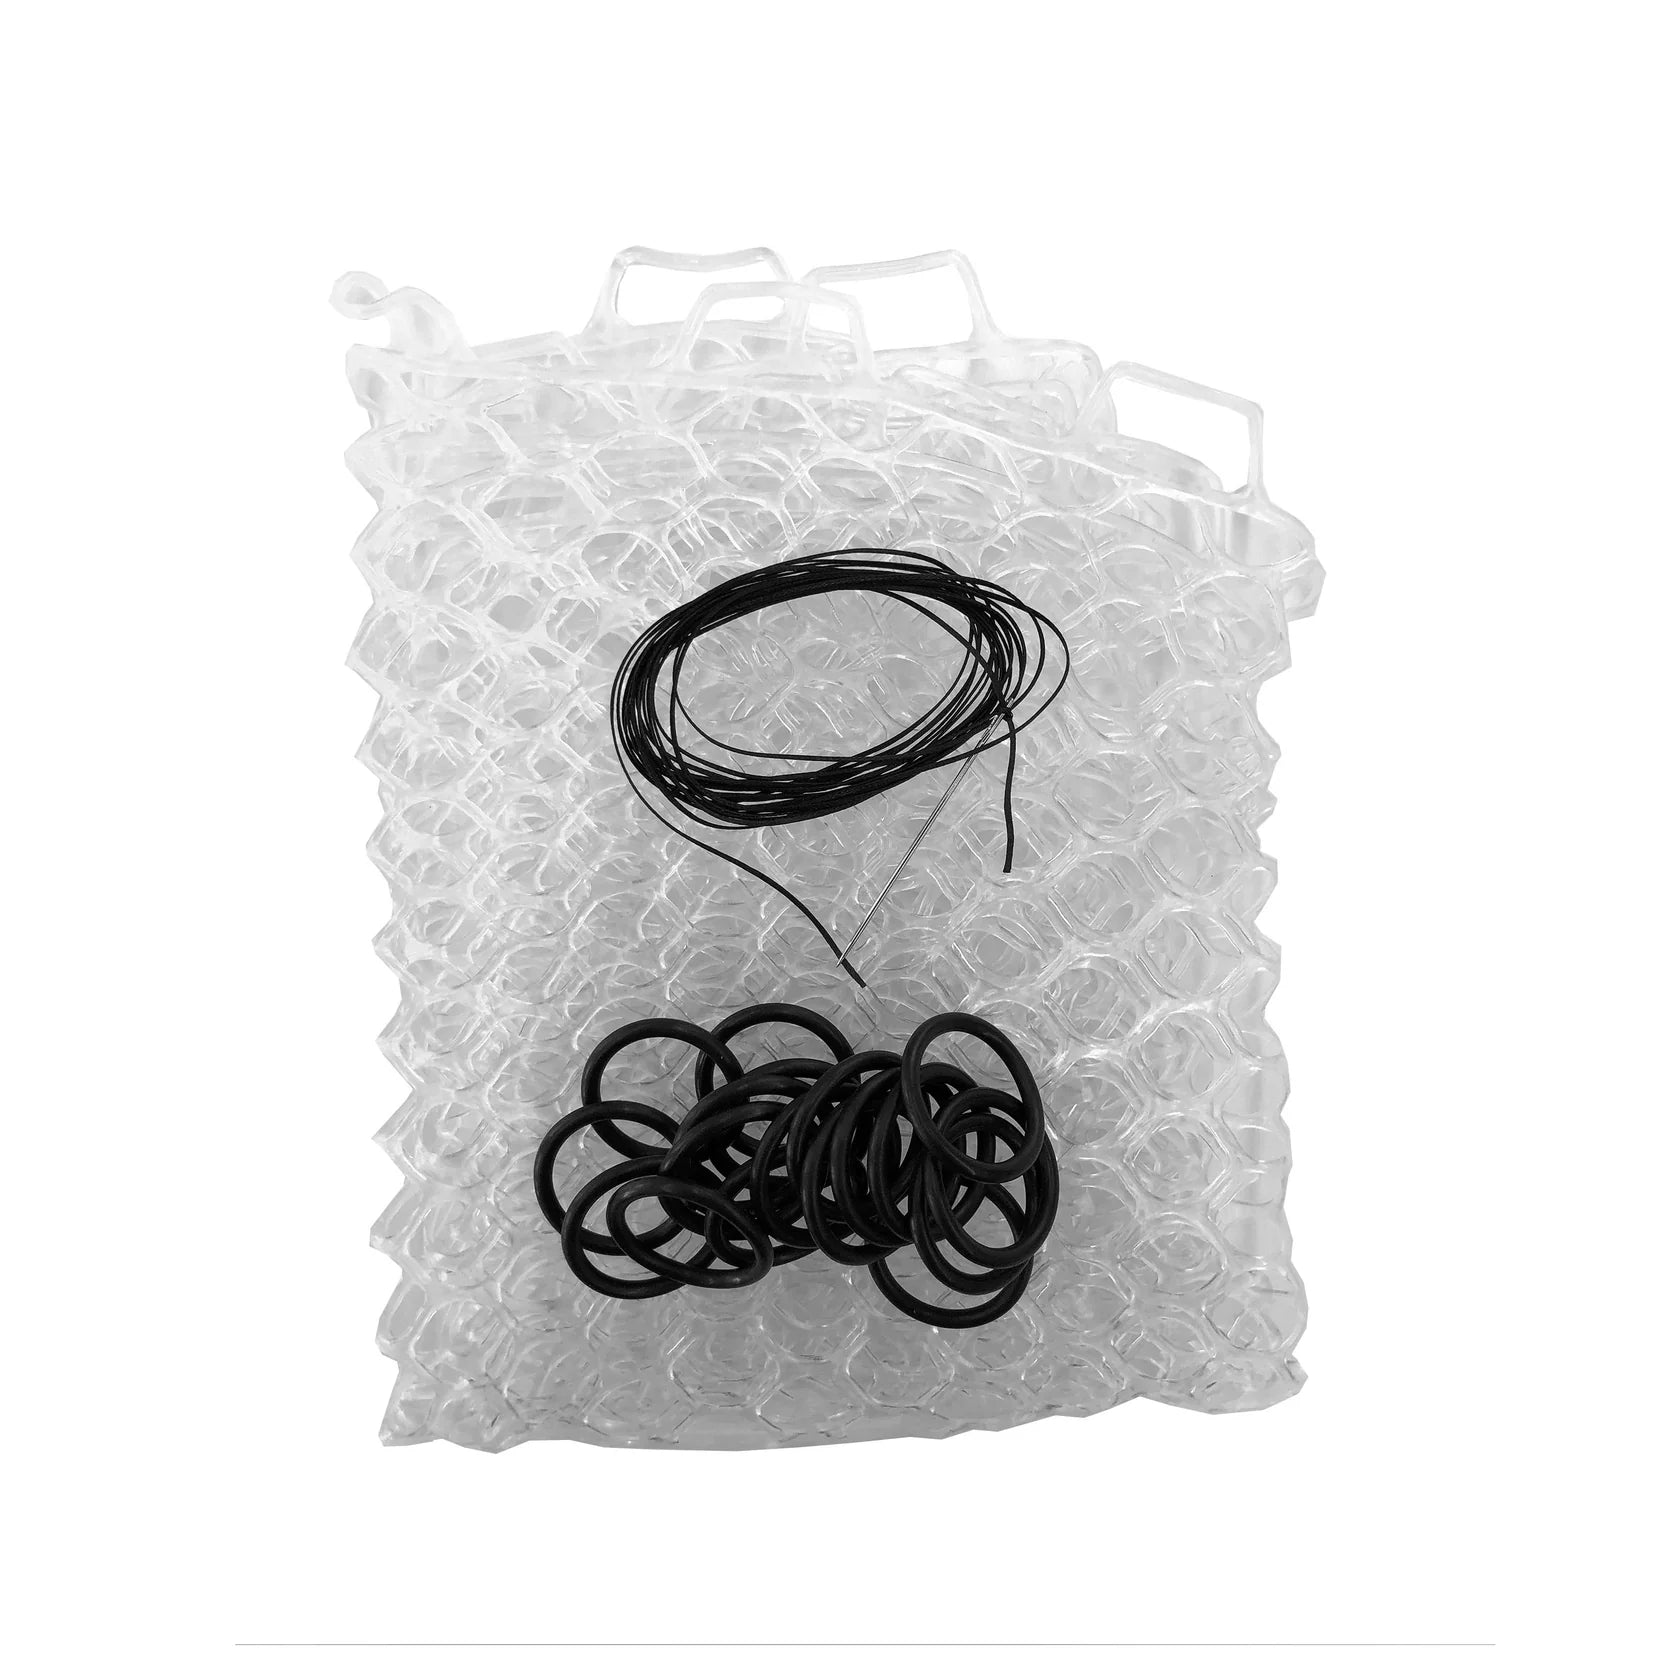 Fishpond Nomad Net Replacement 19"